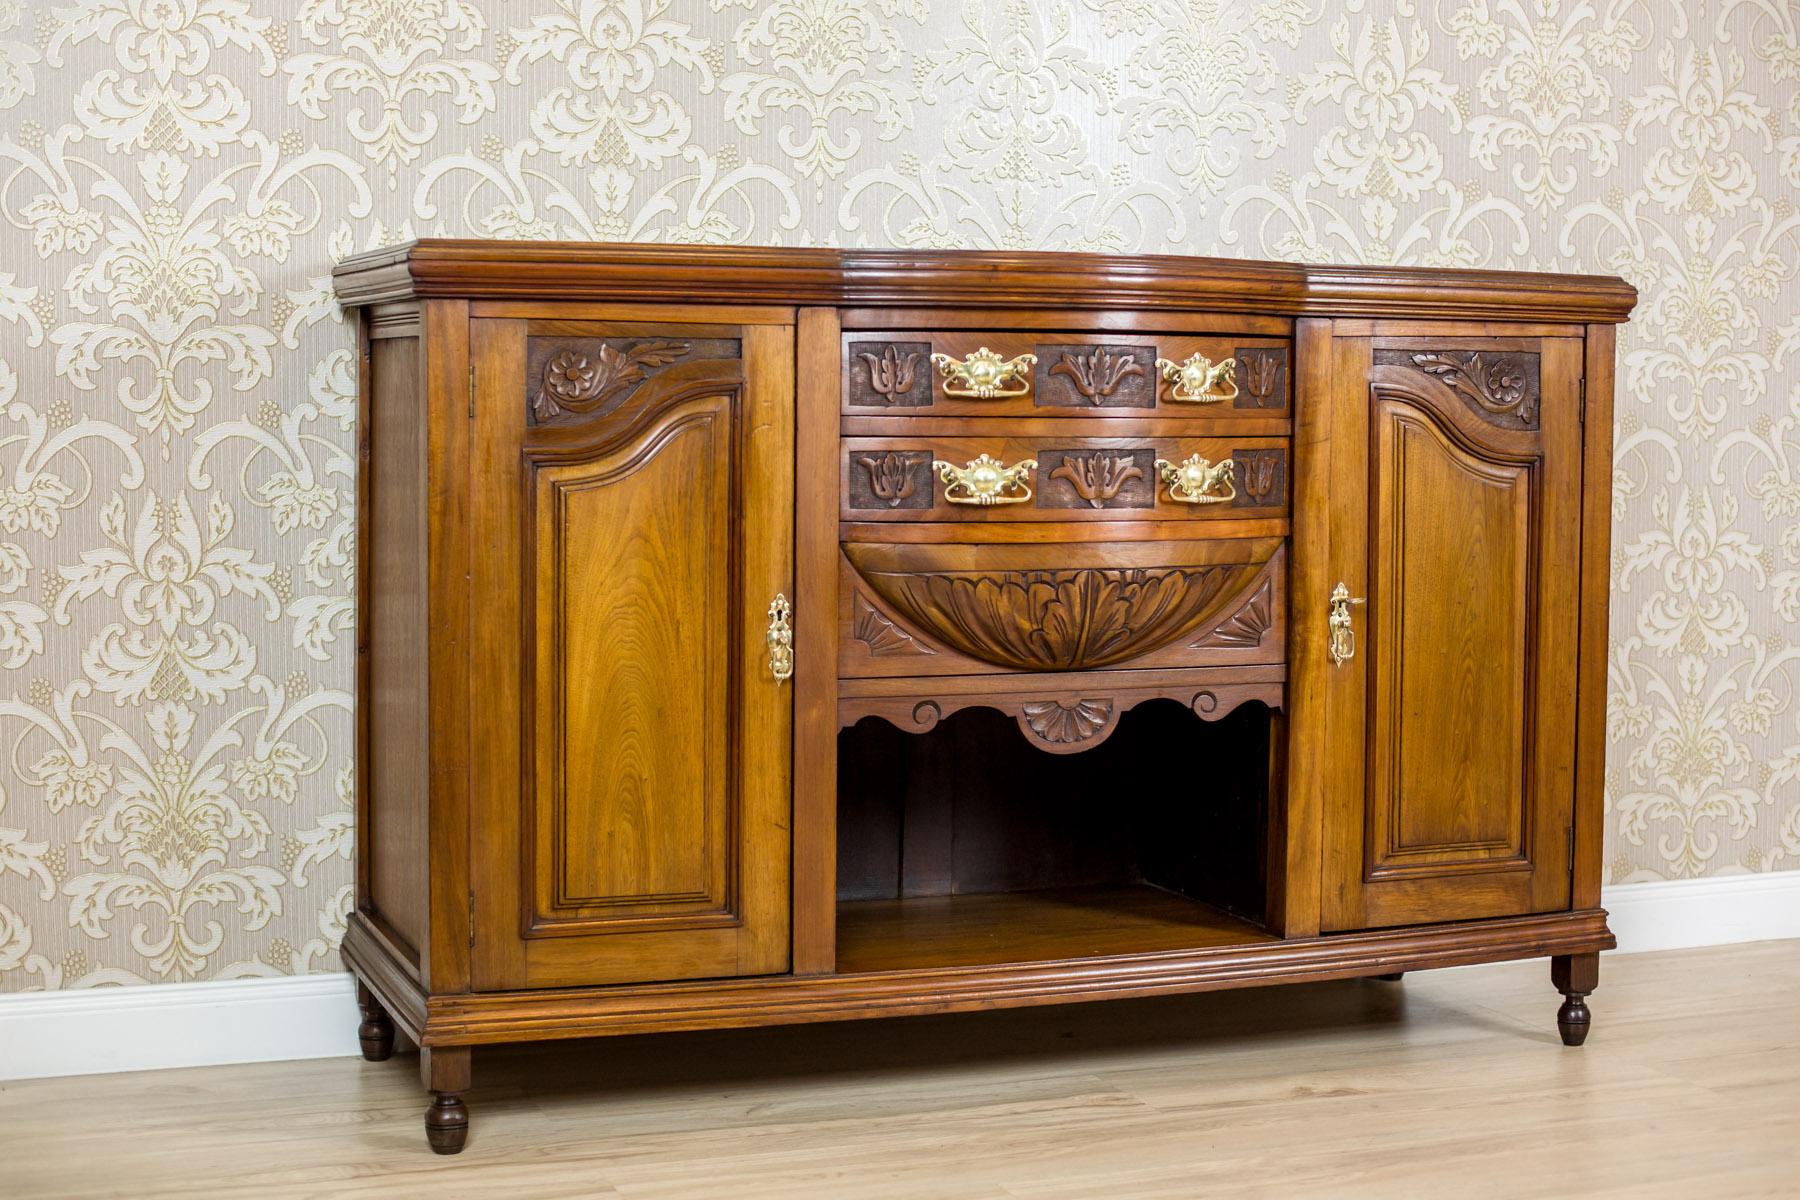 We present you this piece of furniture made of solid walnut wood.
The corpus has two cabinets on the outer sides. There are drawers in its central section, and a niche at the bottom.
Furthermore, there is a sort of an apron under the drawers with